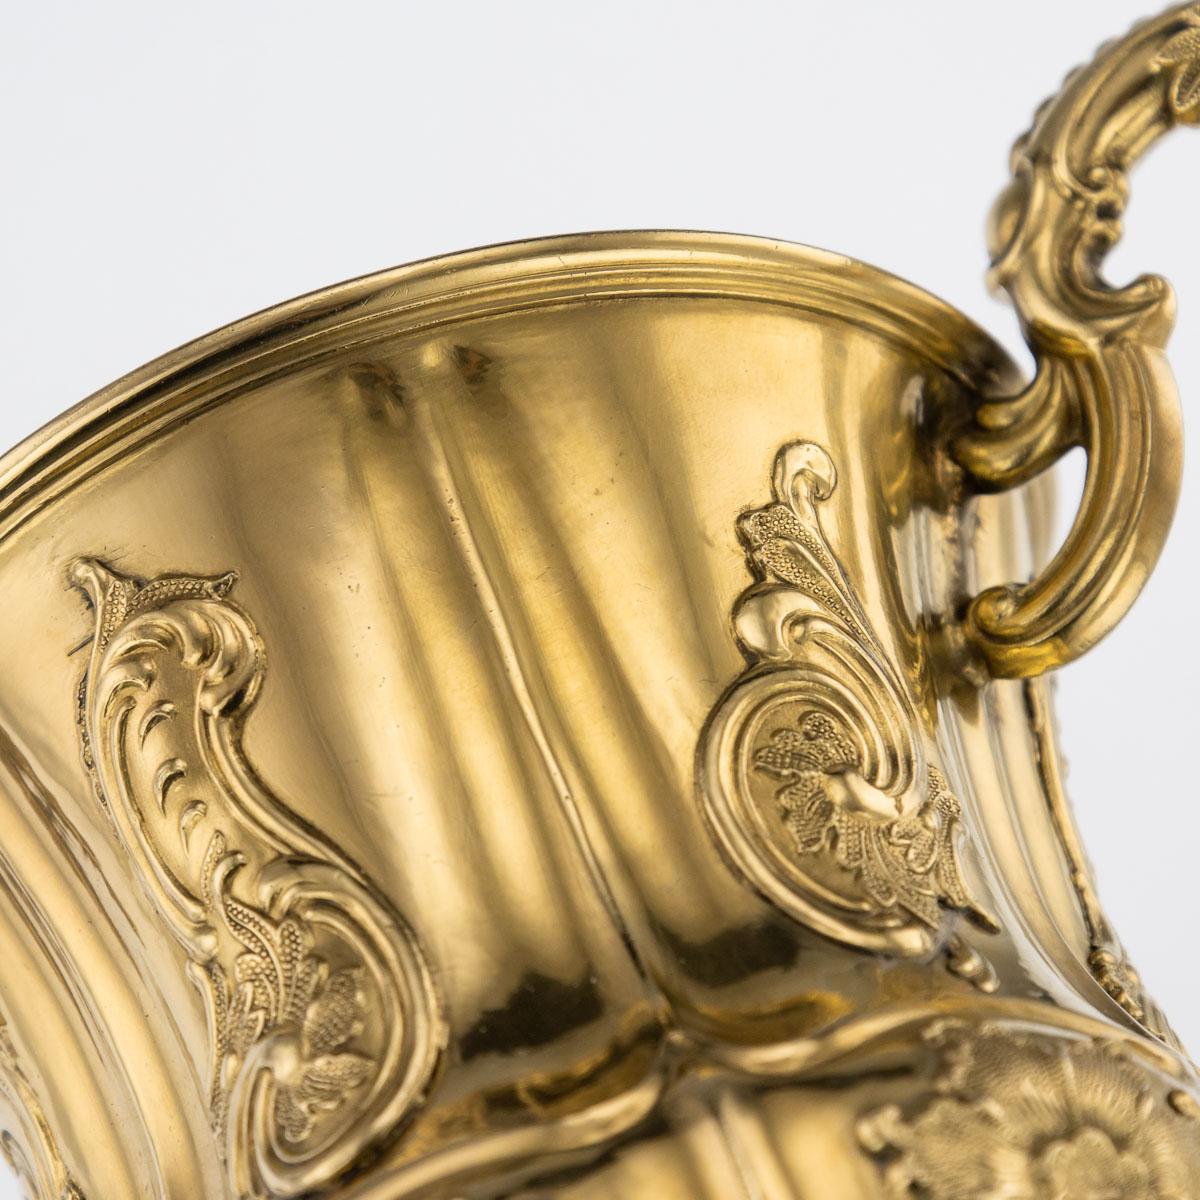 19th Century Russian Solid Silver-Gilt Cup and Cover, St-Petersburg, circa 1842 7